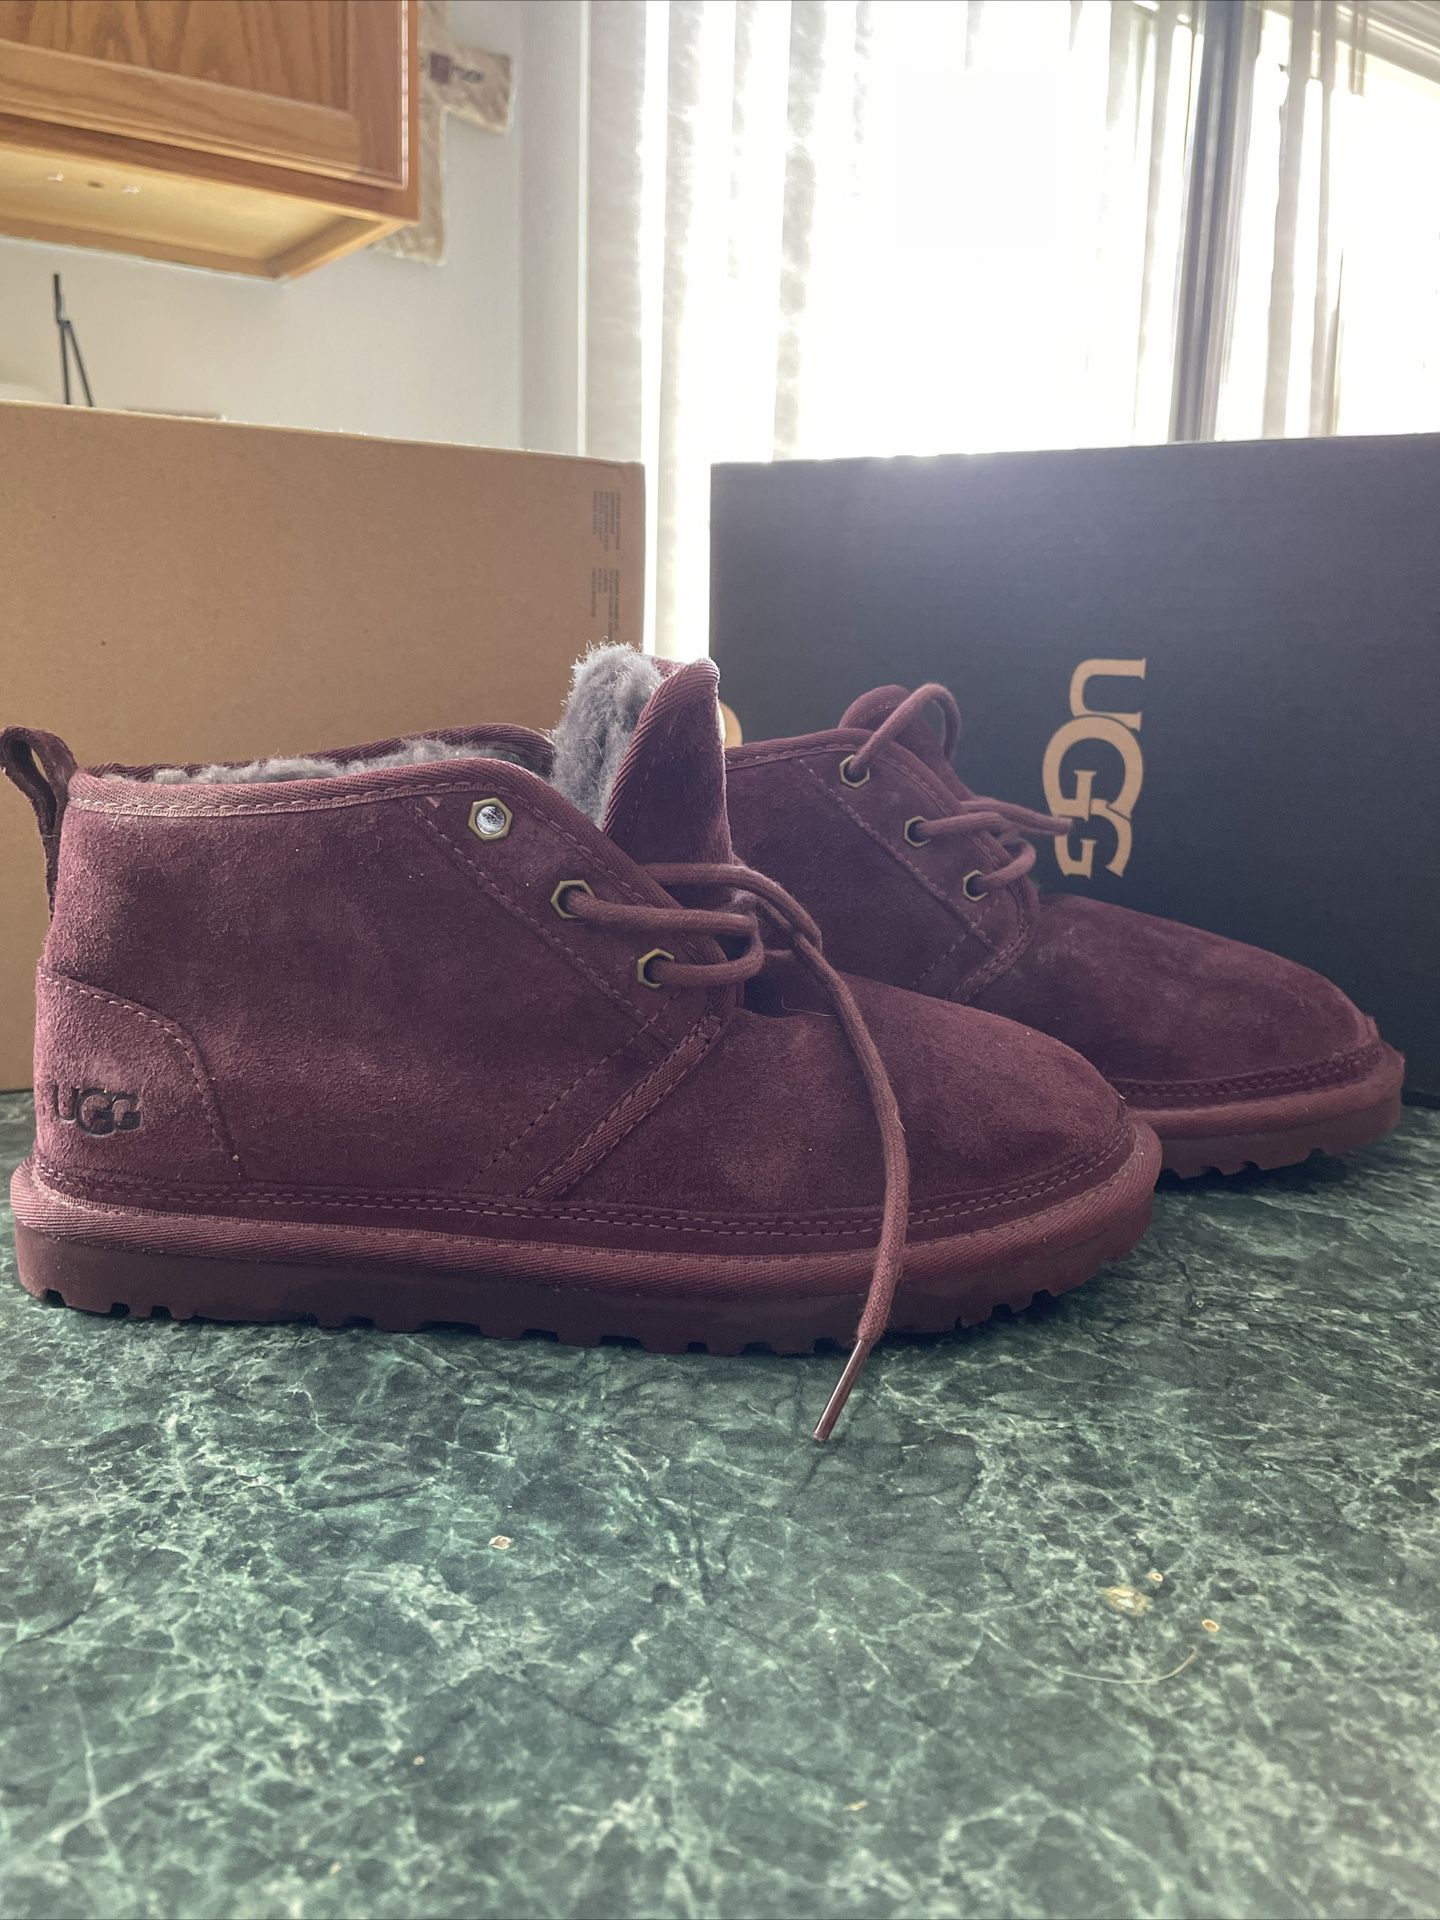 UGG Mens Neumel Boot Chukka Cordovan Maroon Suede Sherpa Lined - Size 6 - Style 3236